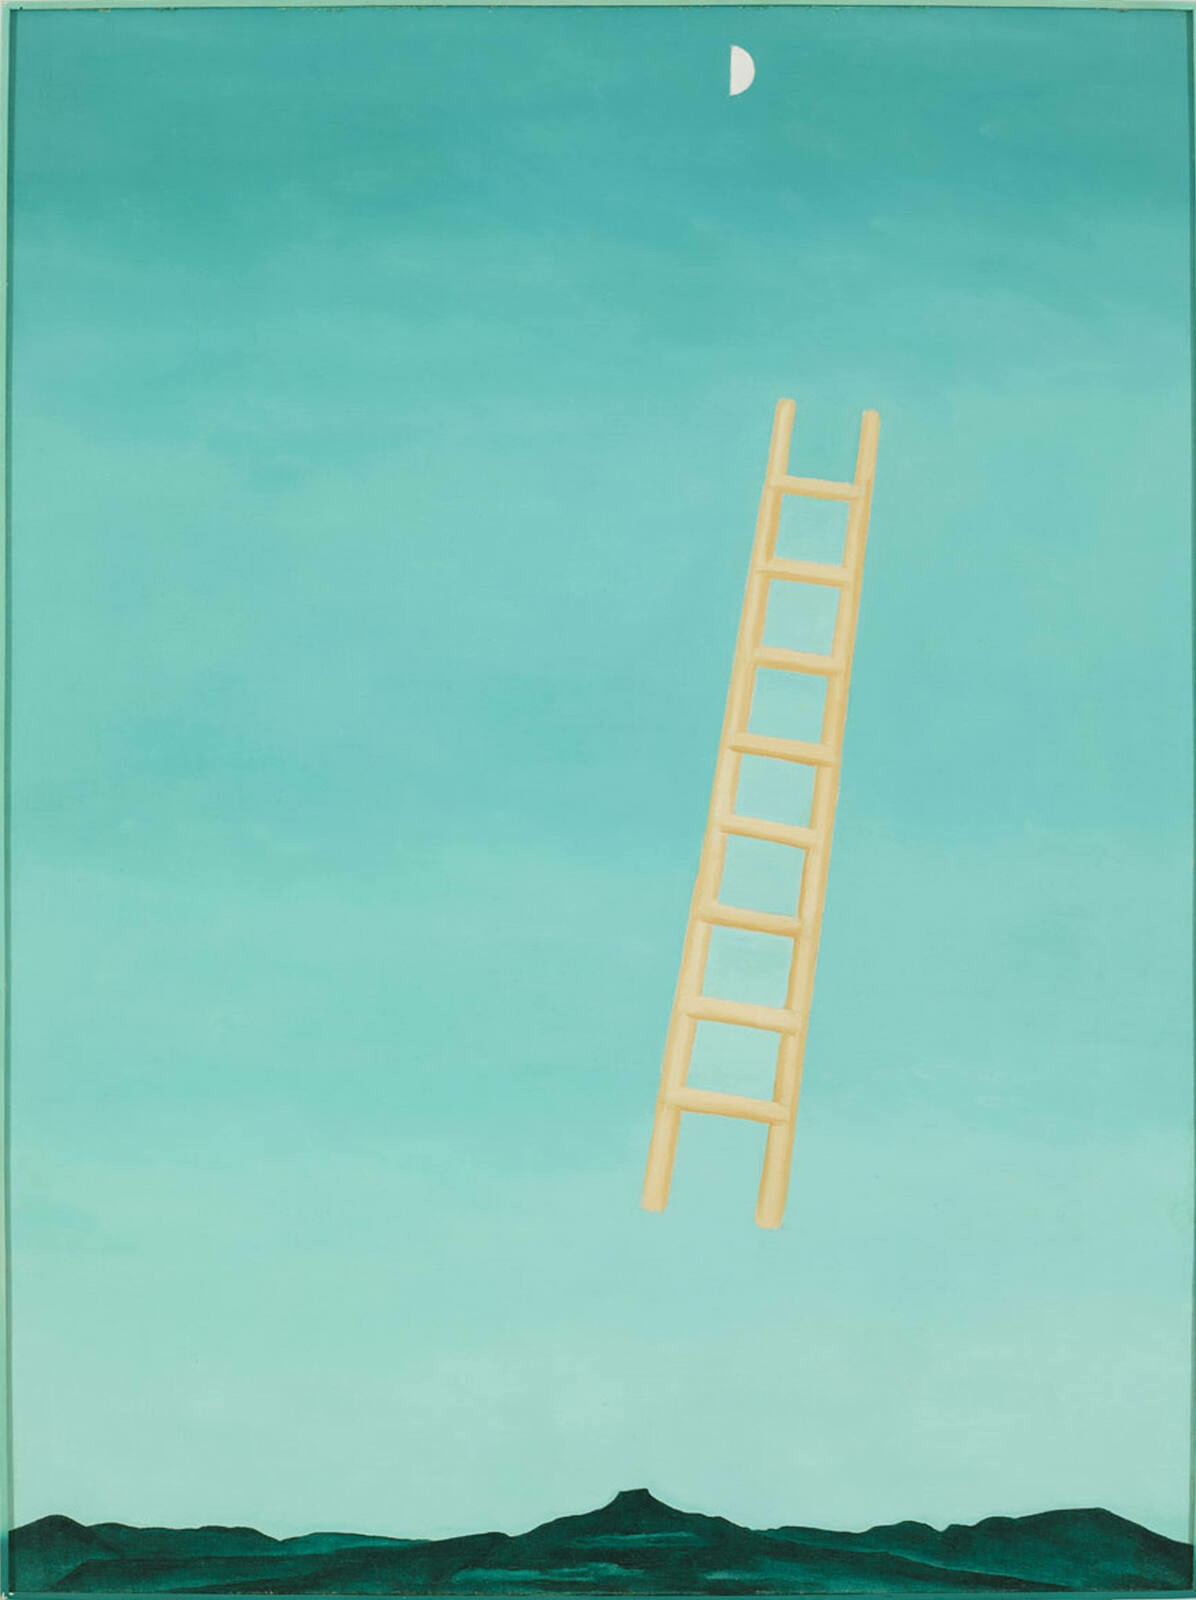 Georgia O'Keeffe. Ladder to the Moon. 1958. Source: Whitney Museum of American Art